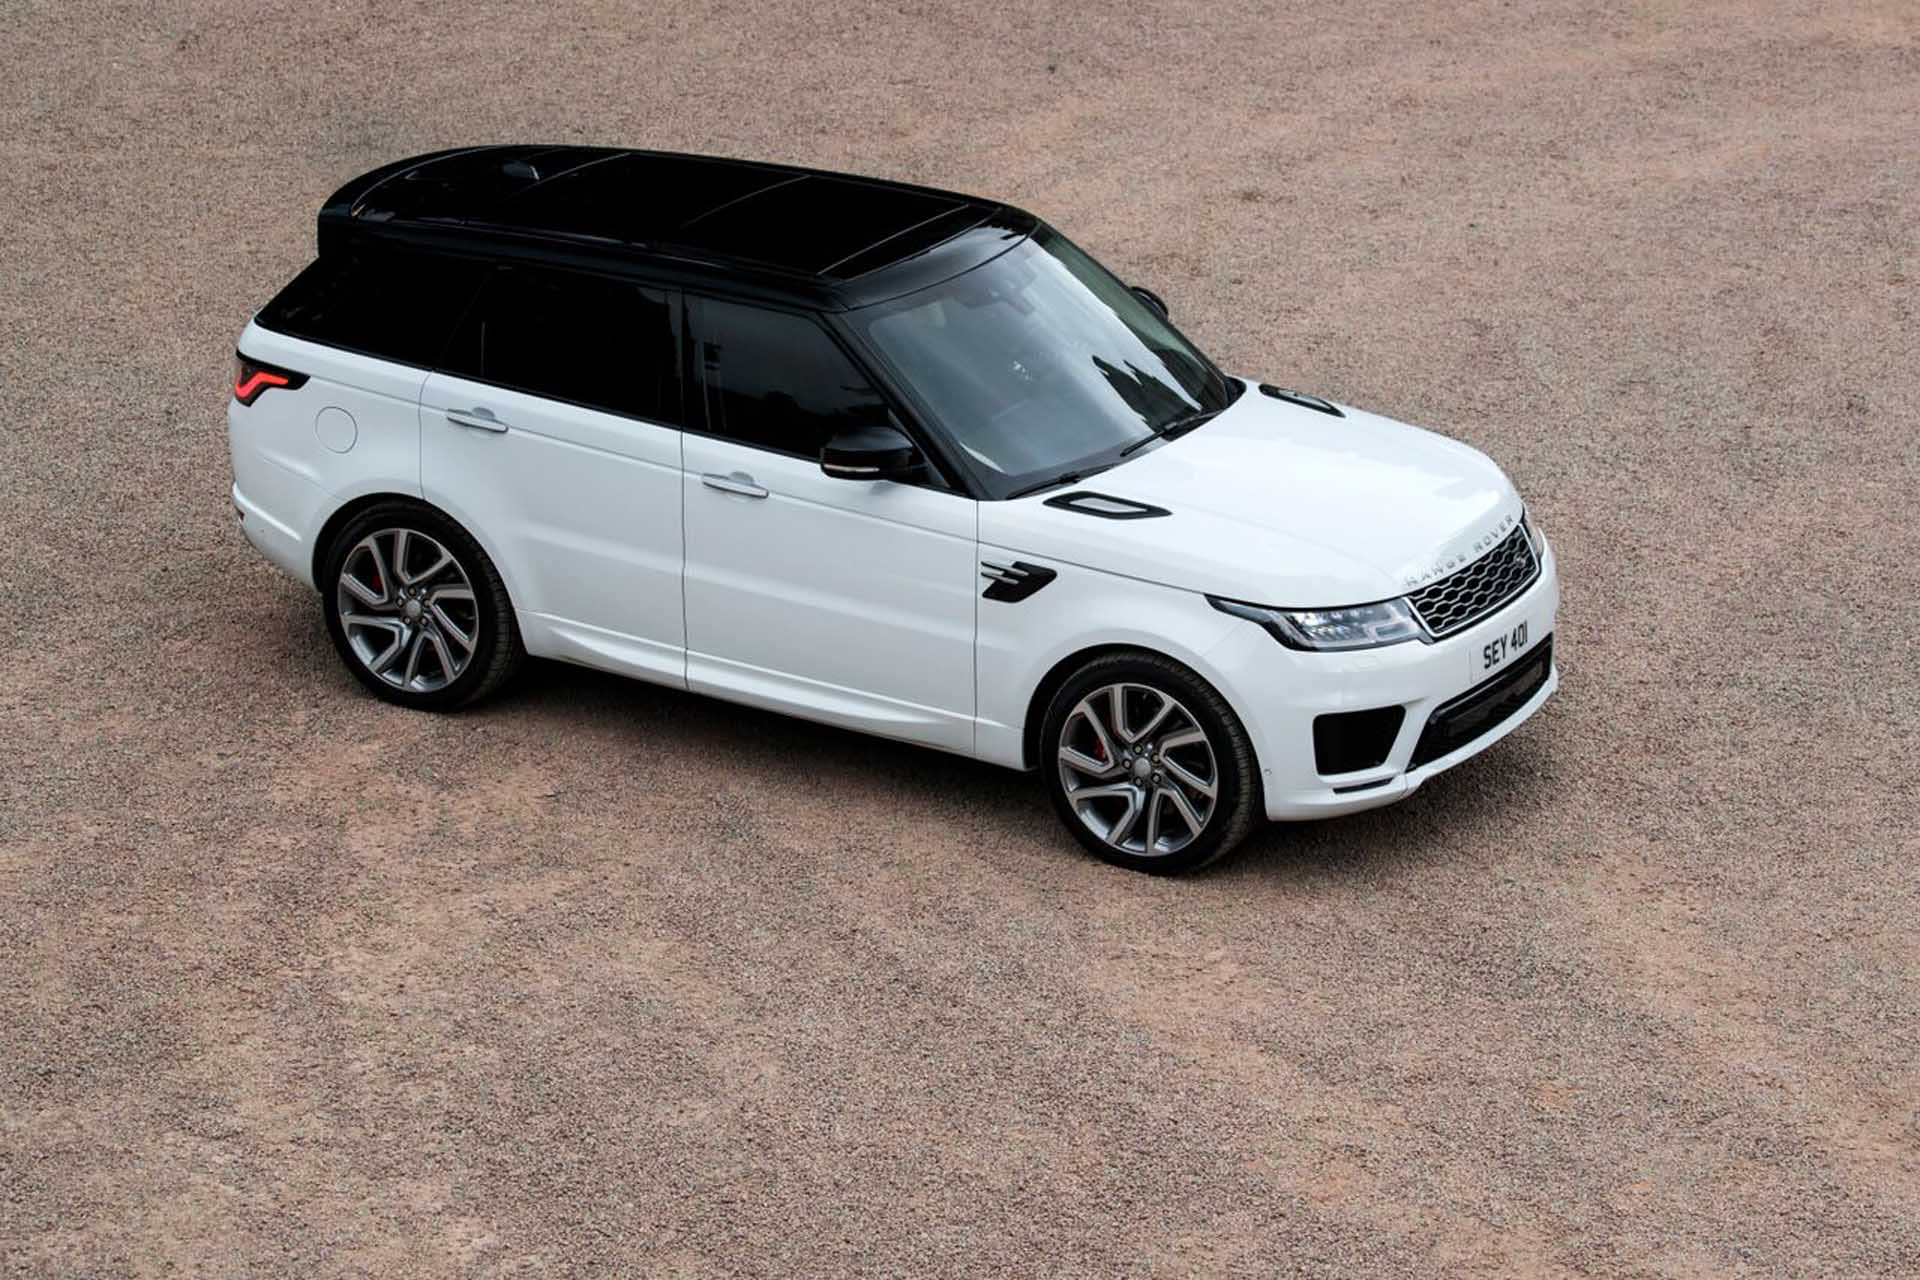 Range Rover Sport Offers  : Land Rover Range Rover Sports Offer A Top Speed Range Between 125Mph And 176Mph, Depending On The Version.